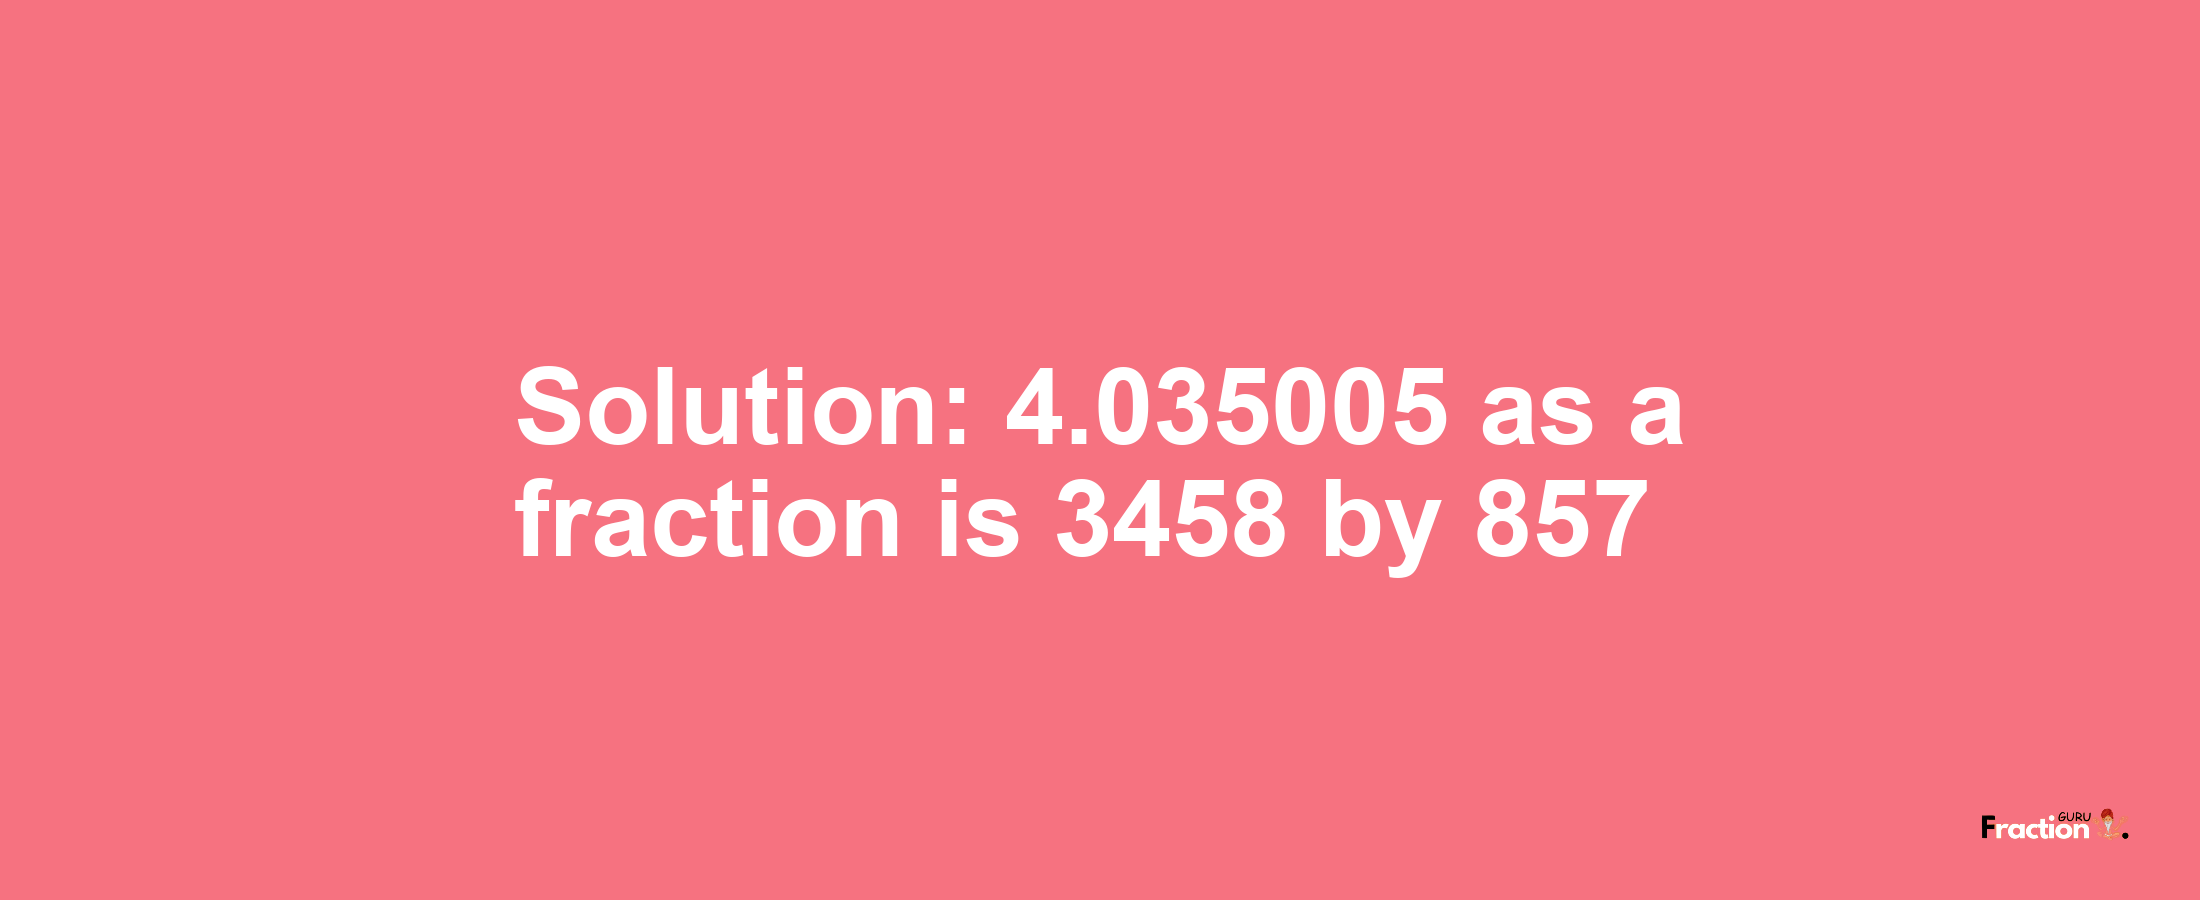 Solution:4.035005 as a fraction is 3458/857